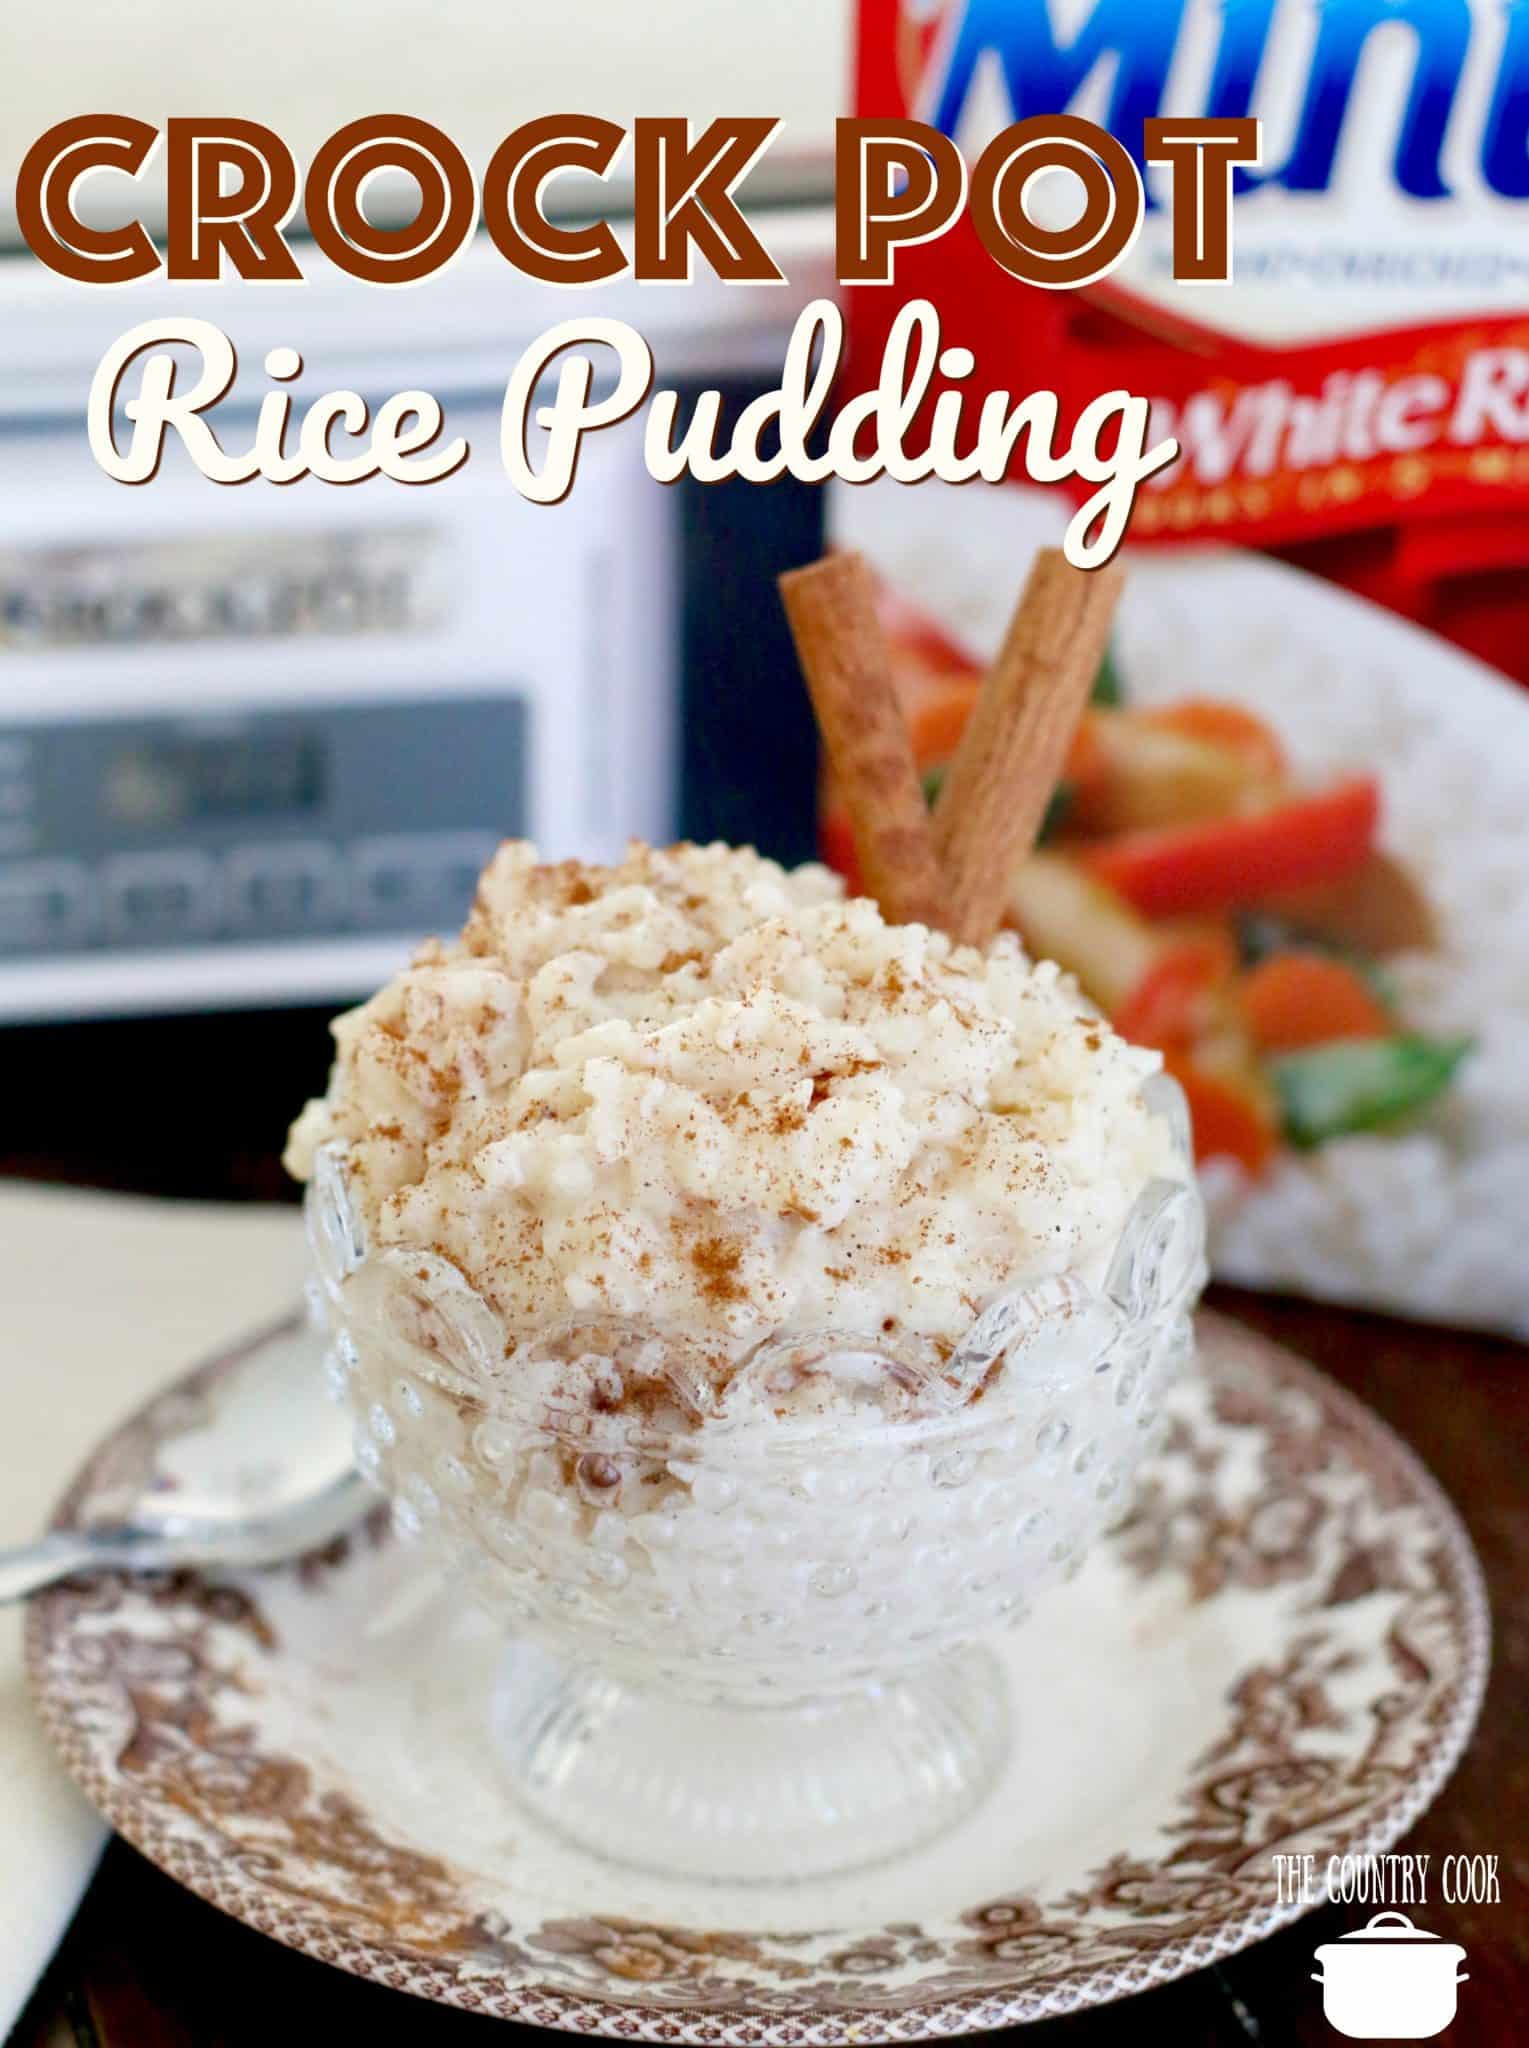 Crockpot Rice Pudding recipe from The Country Cook.